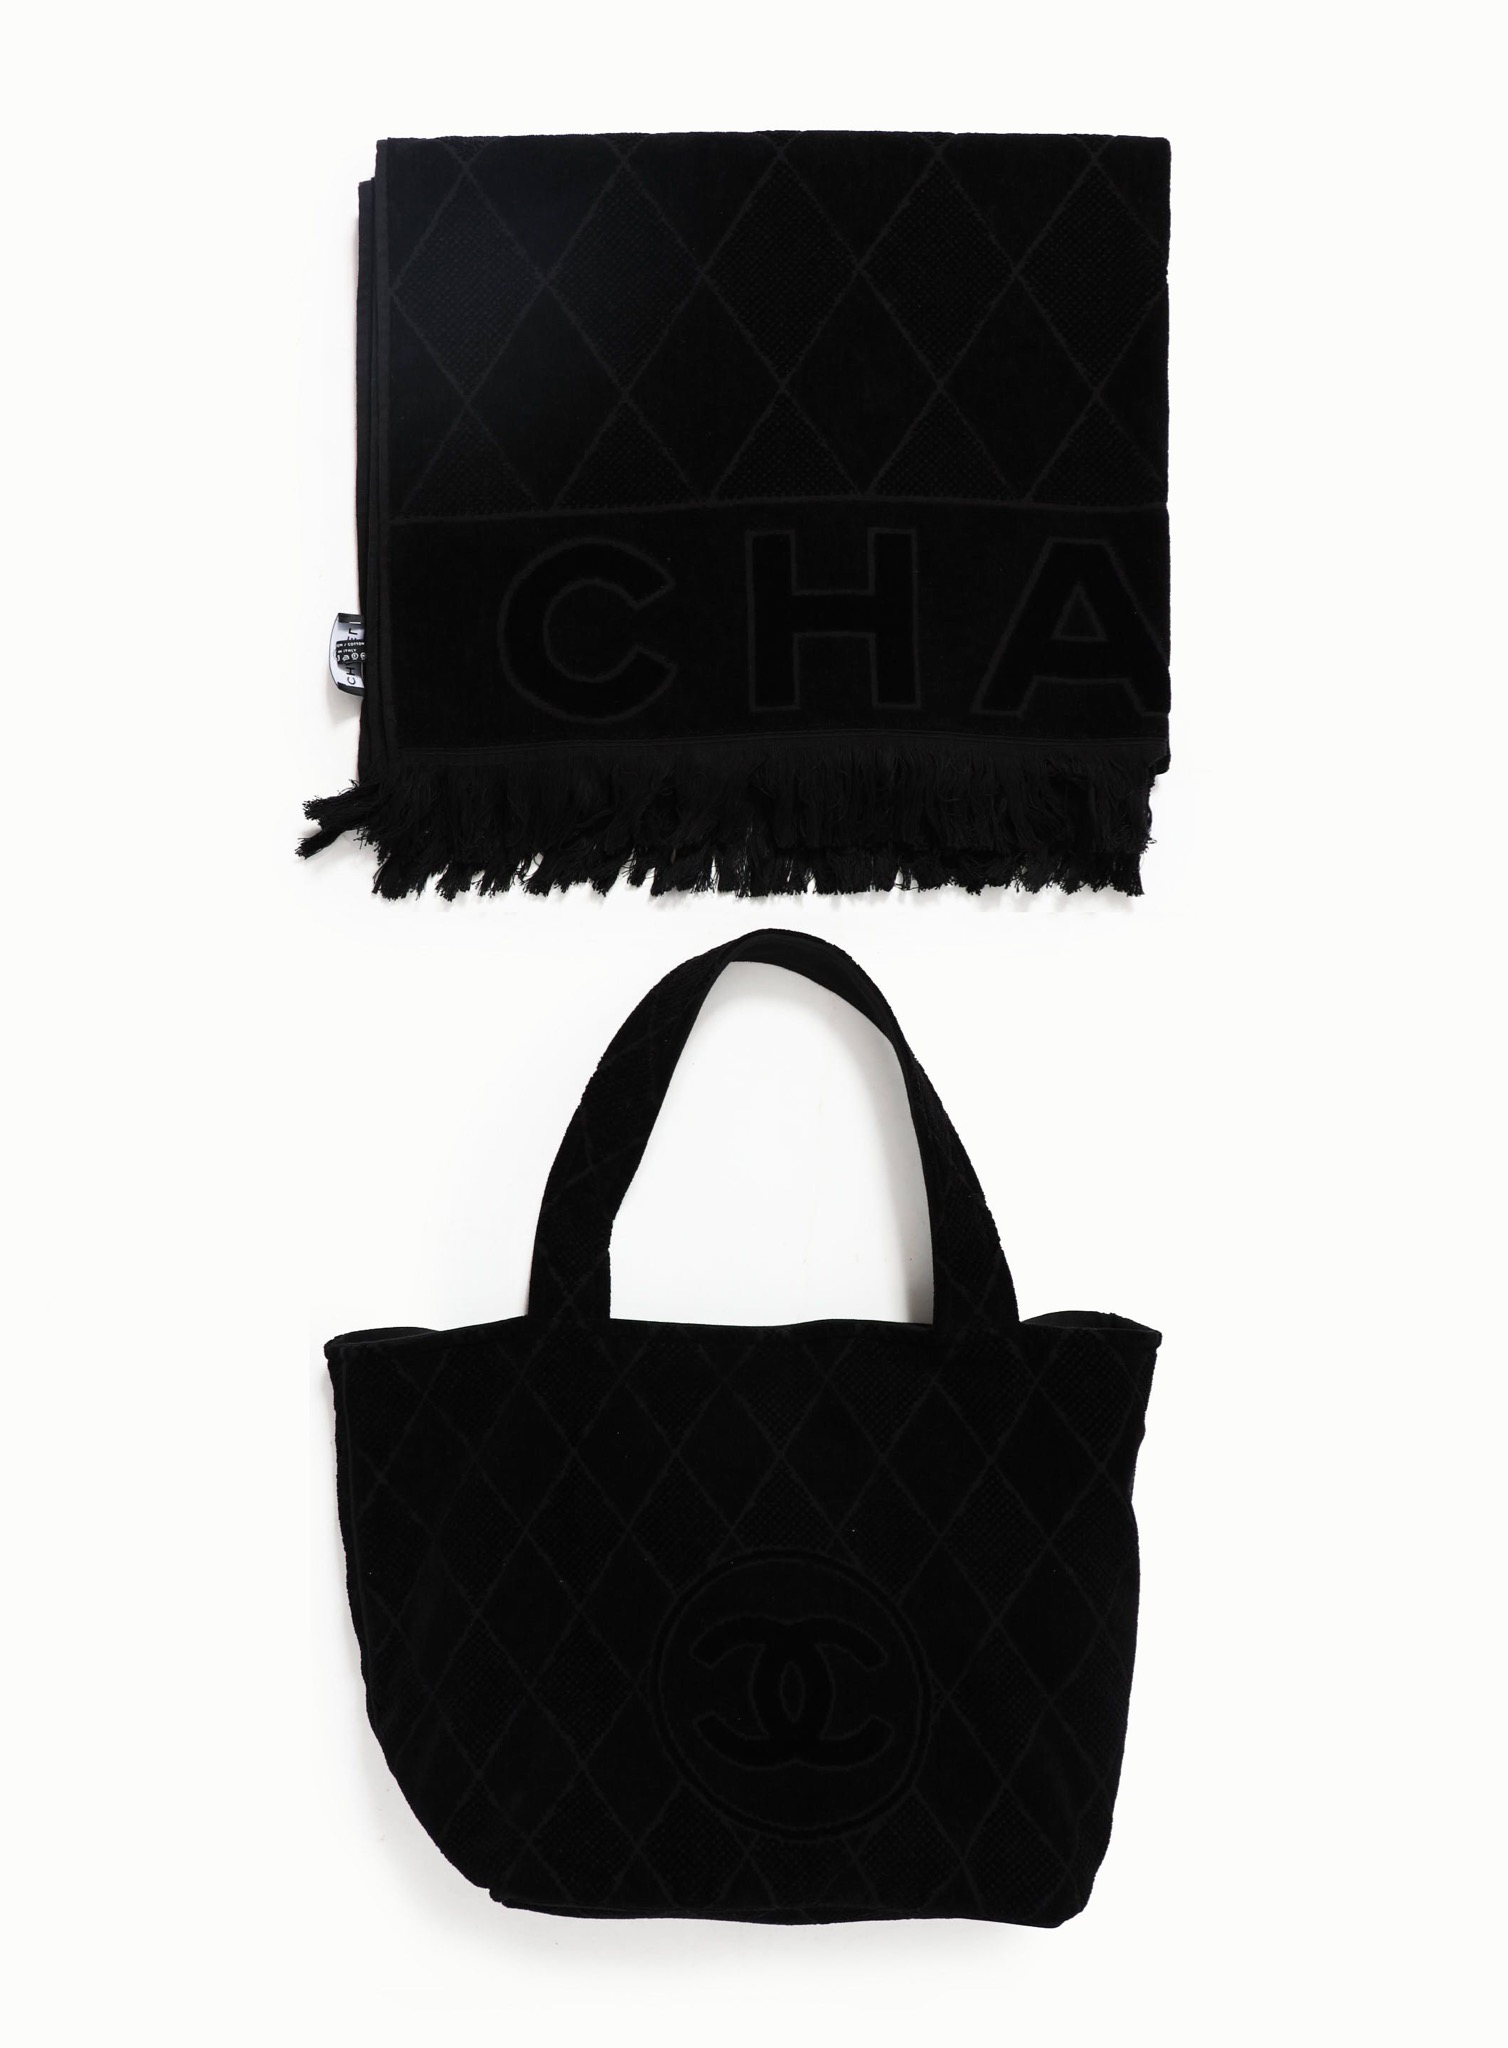 Chanel Towel Bag Black with Pouch and Towel, New MA001 - Julia Rose Boston